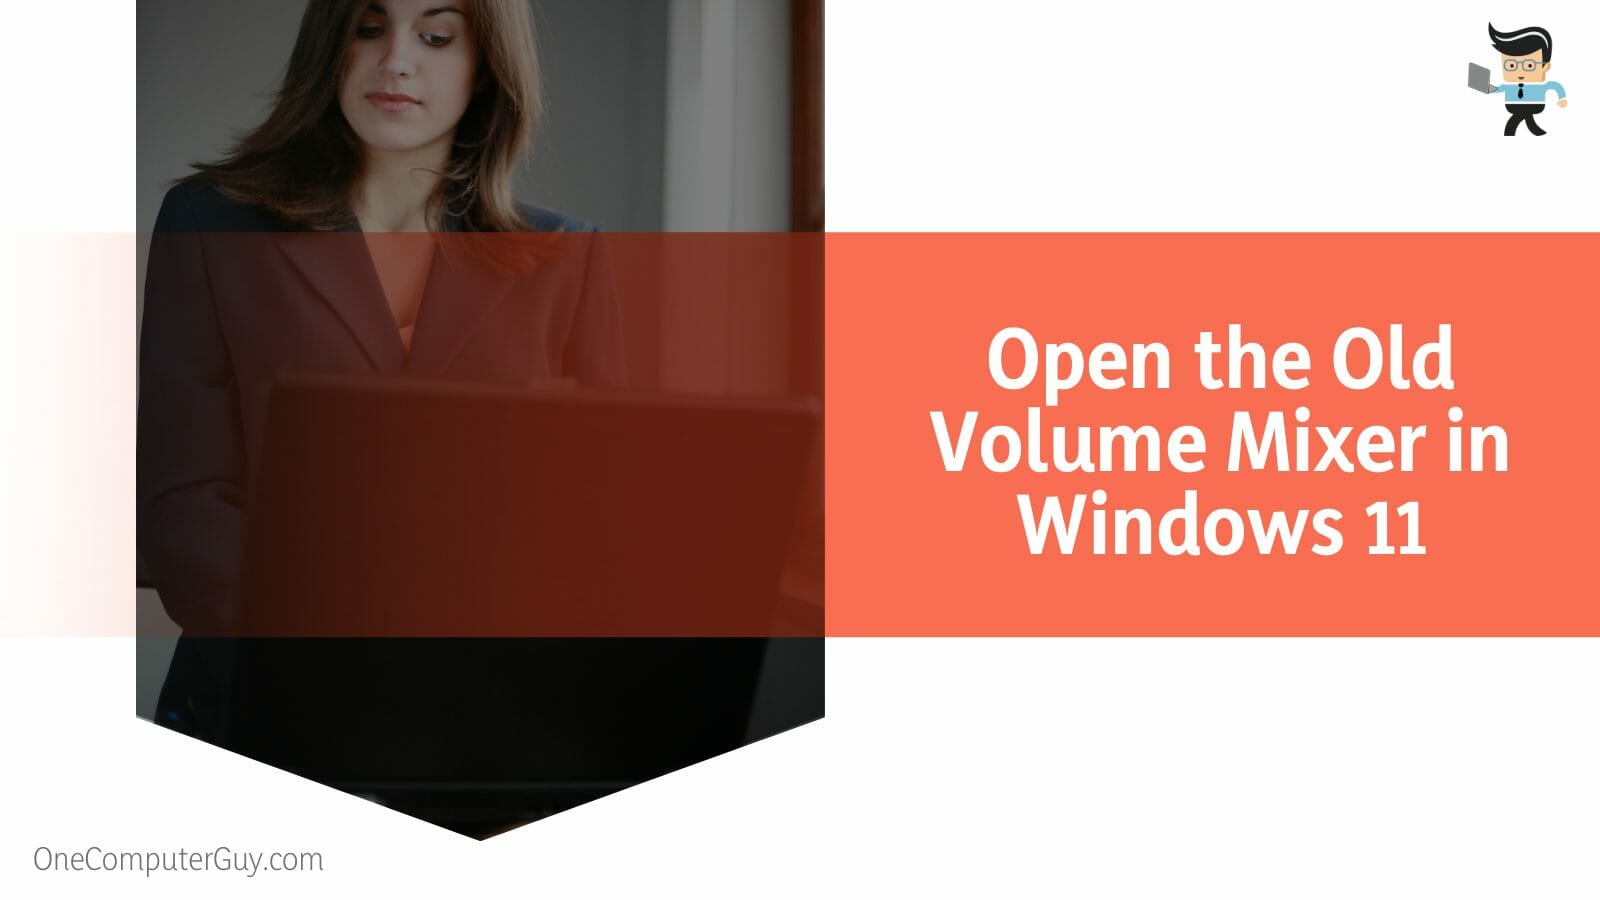 Open the Old Volume Mixer in Windows 11